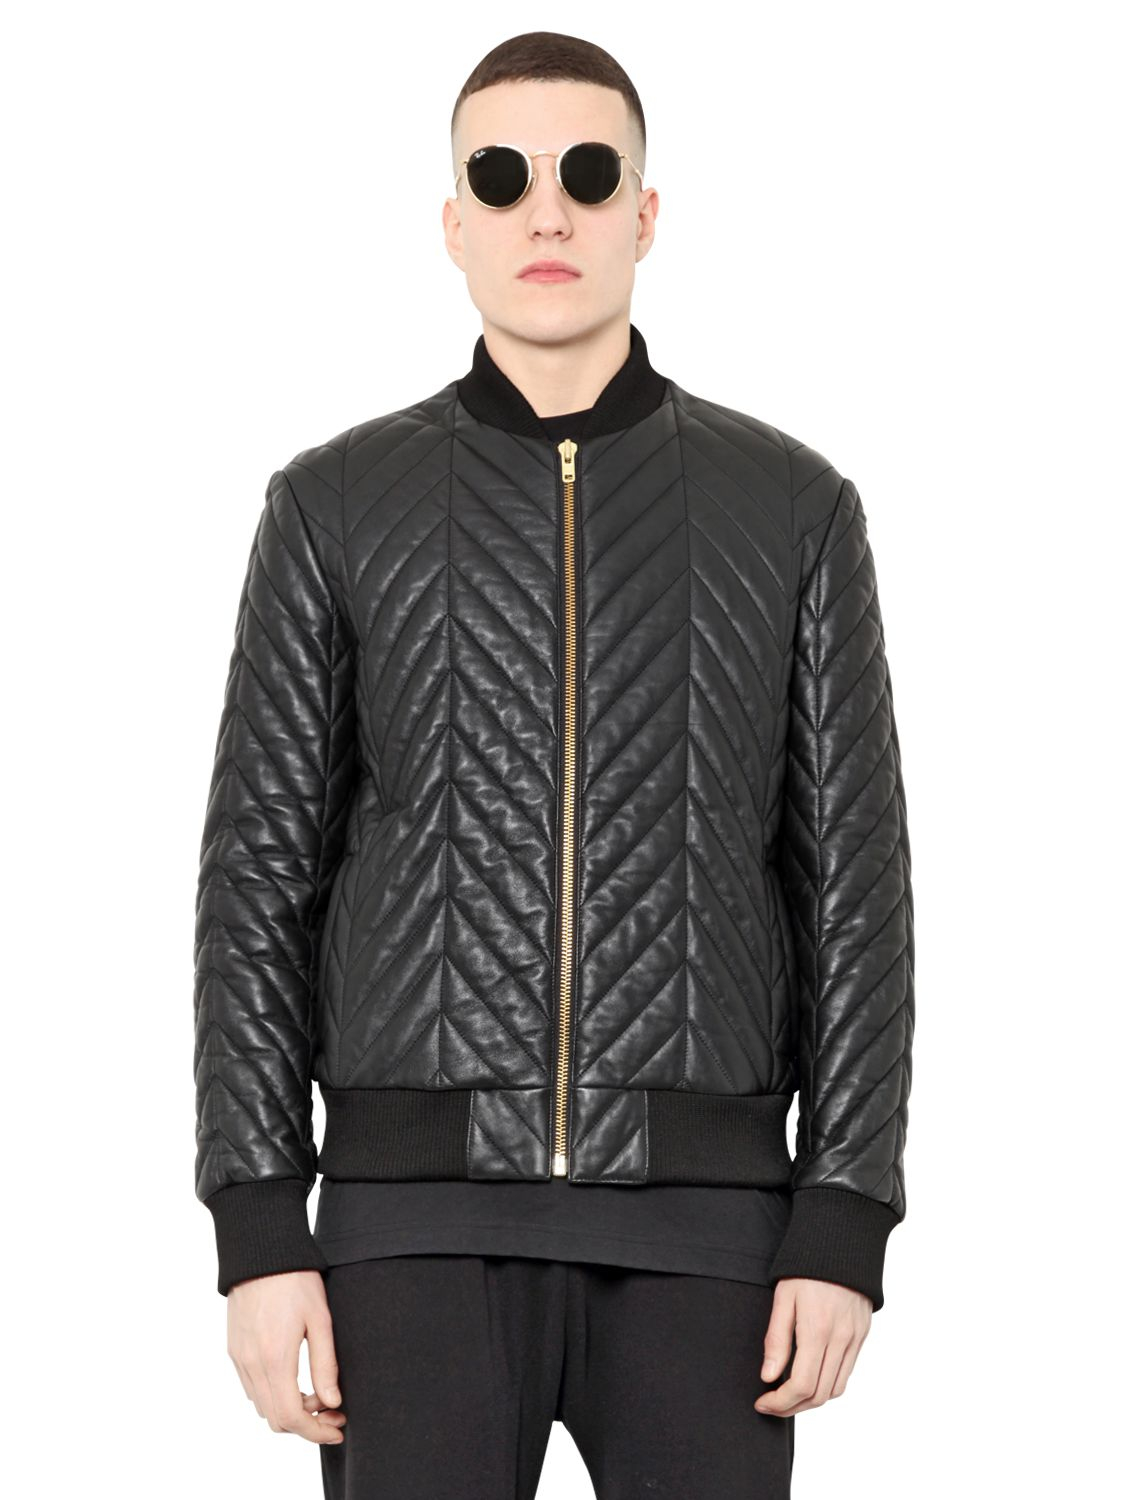 Blood brother Quilted Leather Bomber Jacket in Black for Men | Lyst